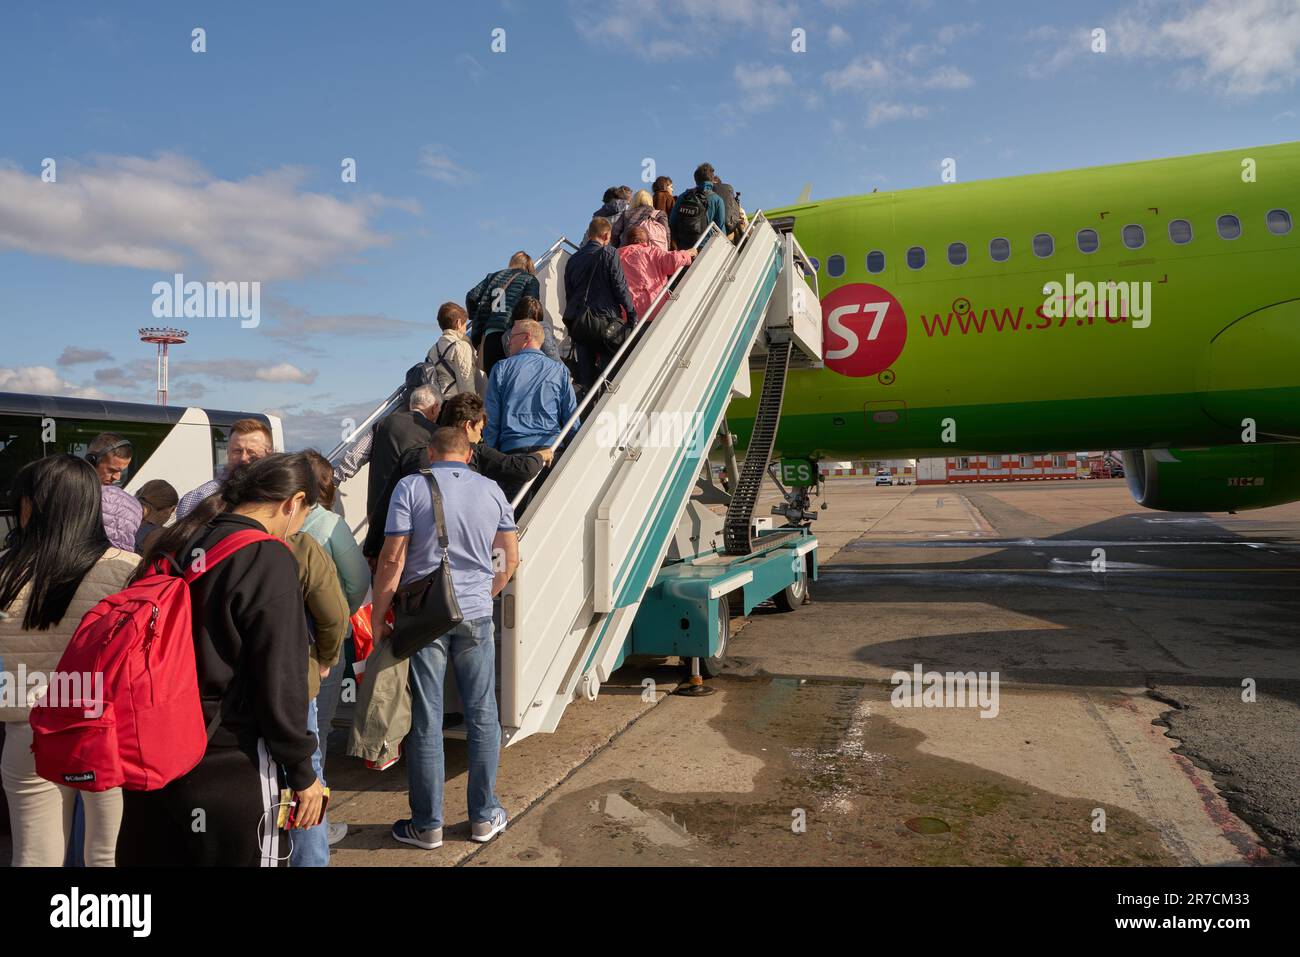 MOSCOW, RUSSIA - CIRCA SEPTEMBER, 2019: people boarding S7 airliner on tarmac at Moscow Domodedovo Airport. Stock Photo